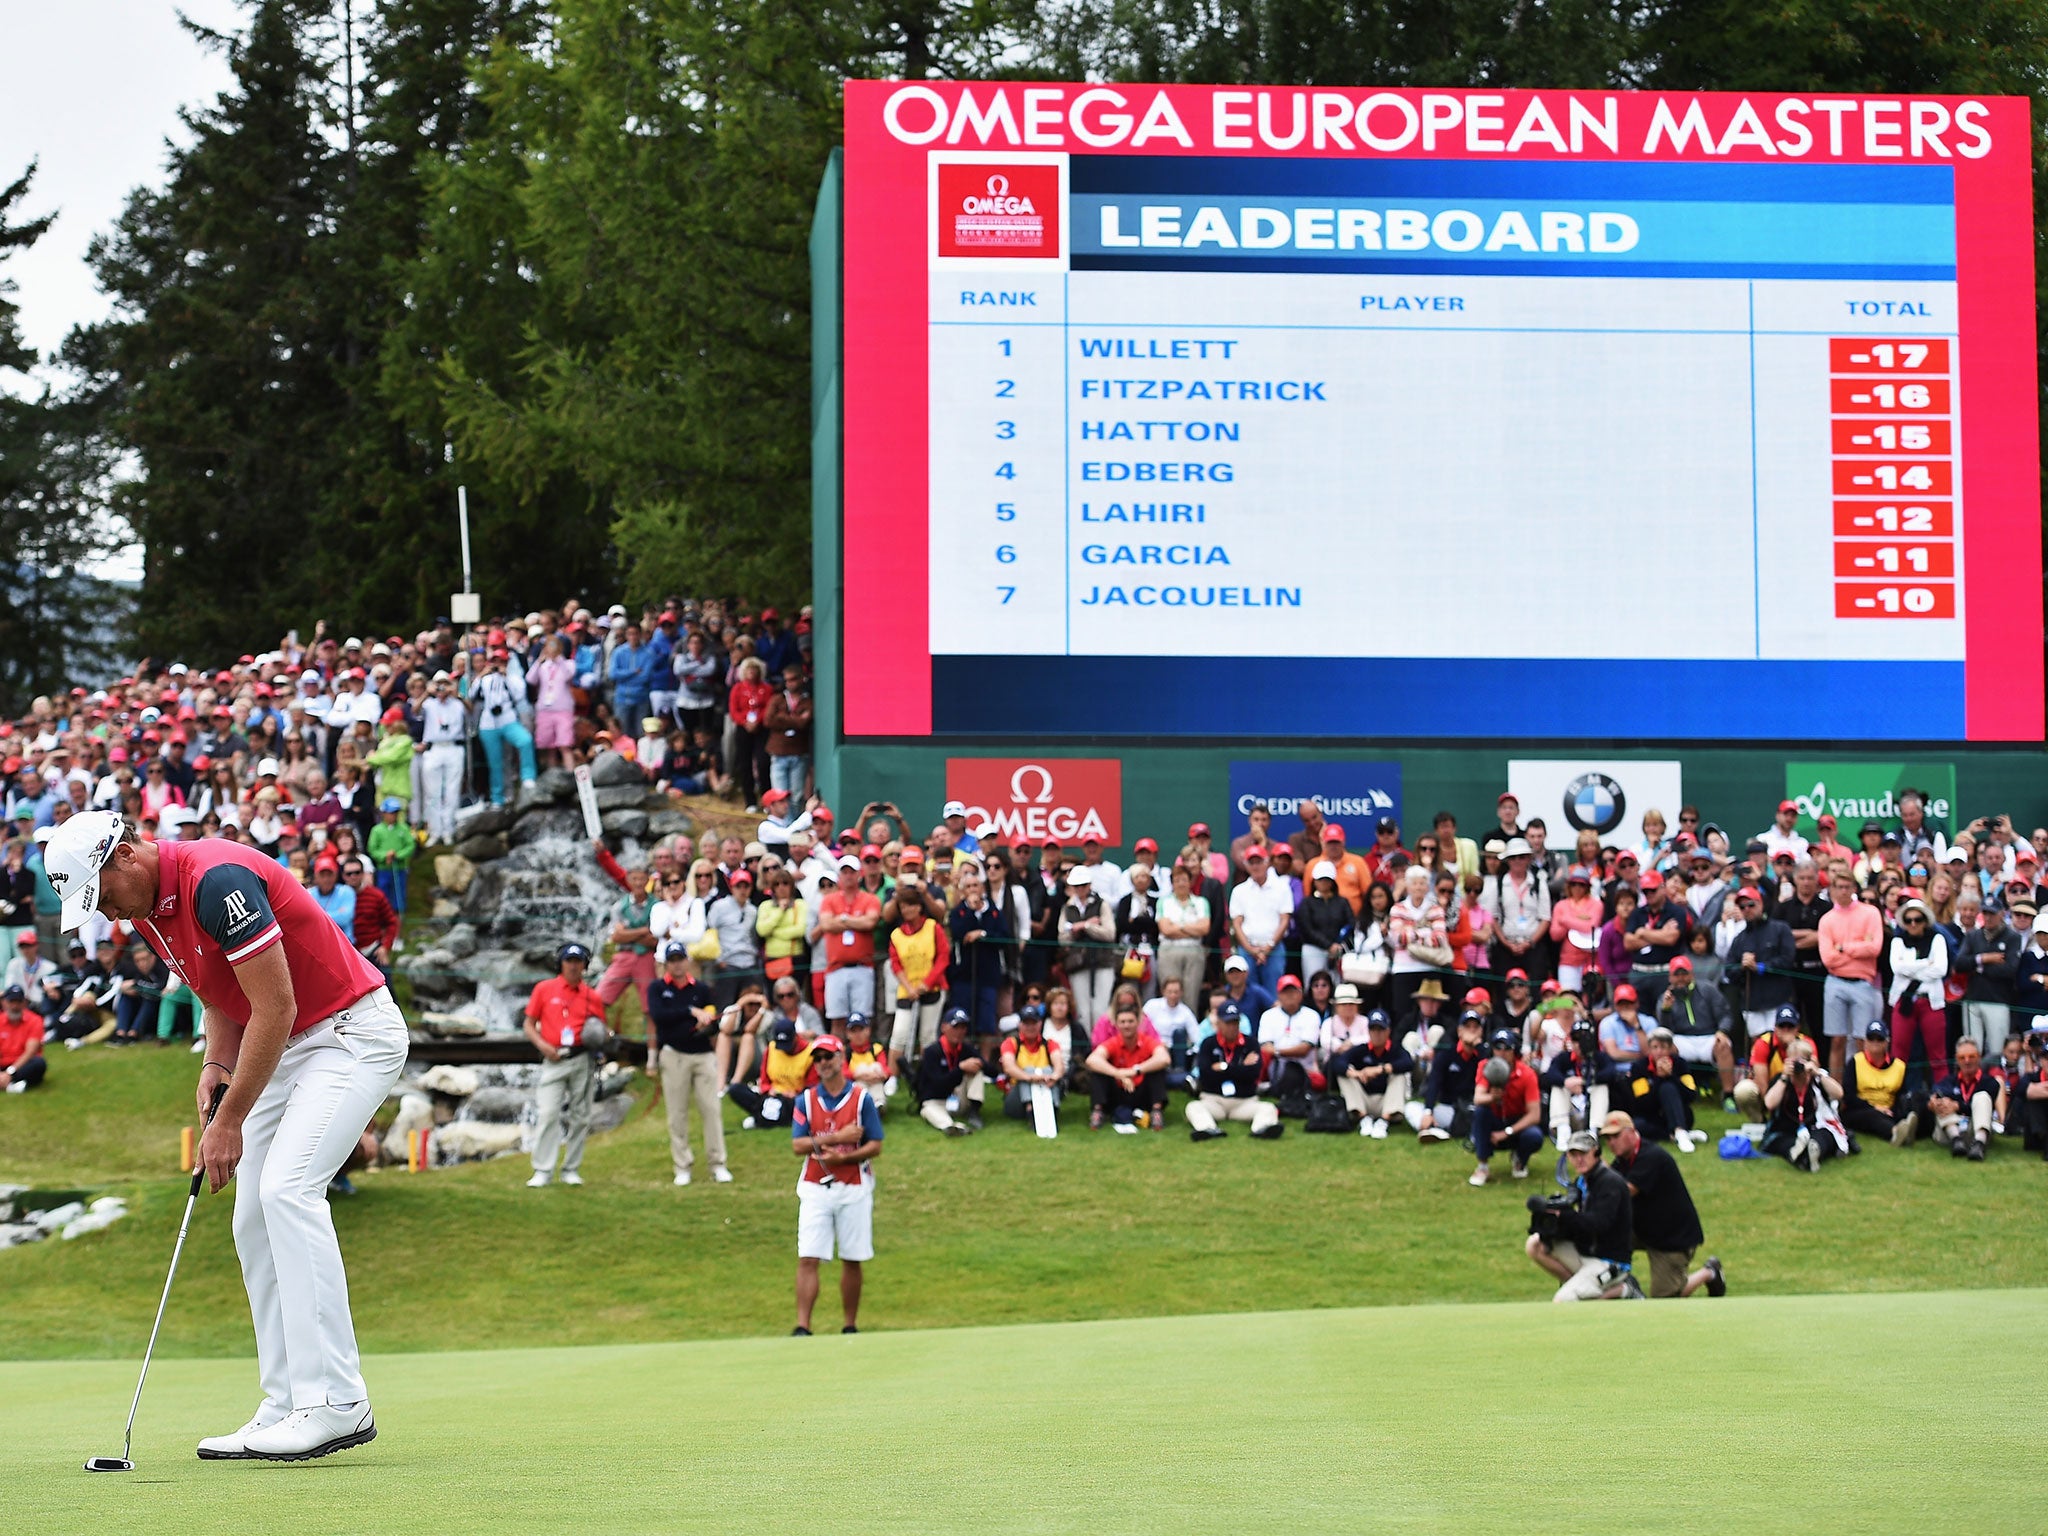 Danny Willett holes on the 18th to win the European Masters in Switzerland